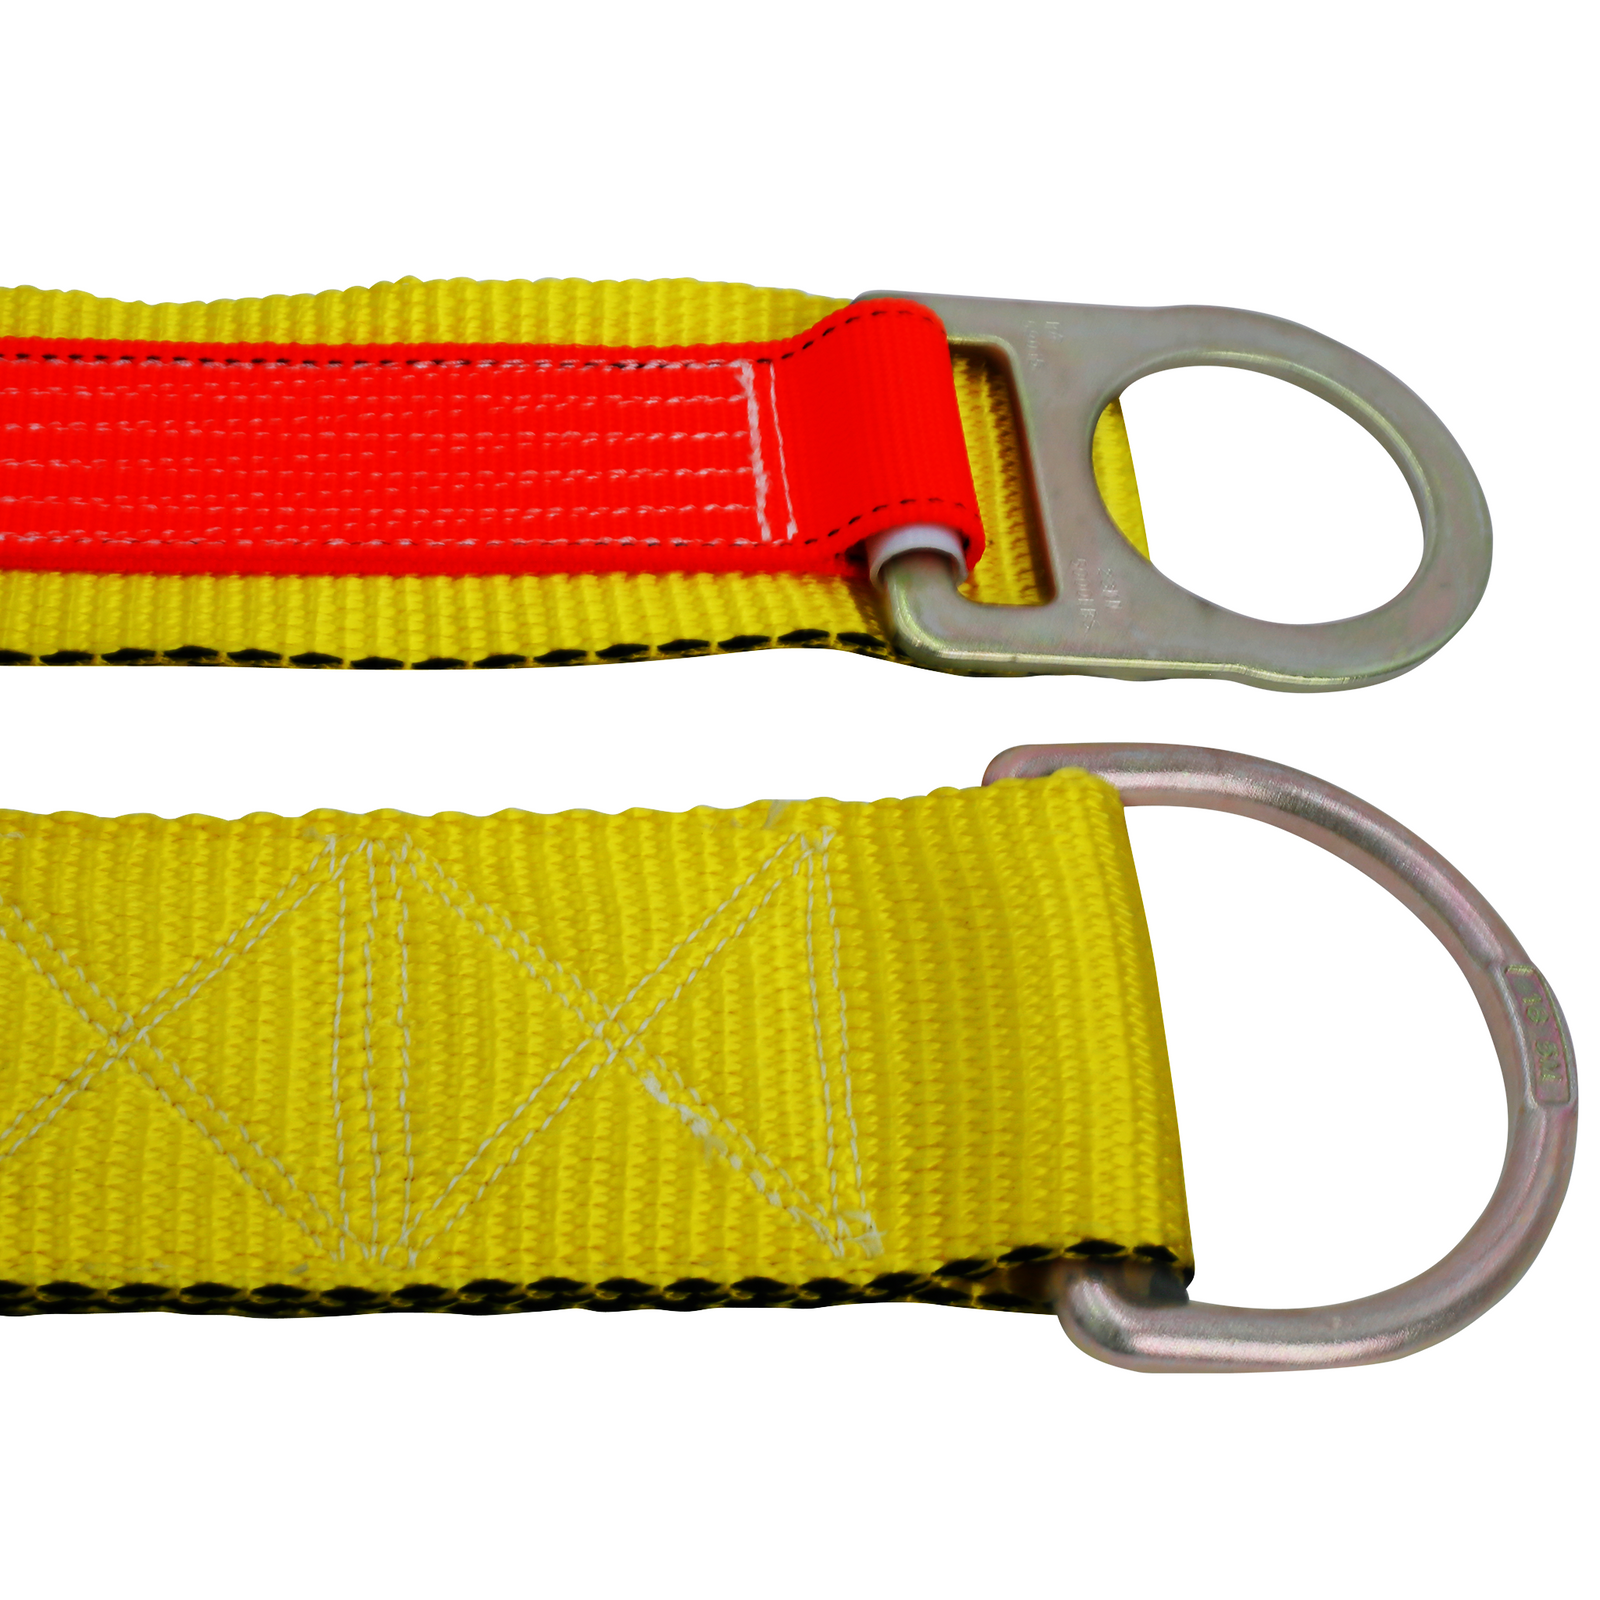 Close up showing the heavy duty stitching and the 2 metal rings of the JORESTECH yellow and orange cross arm anchor strap with double D ring